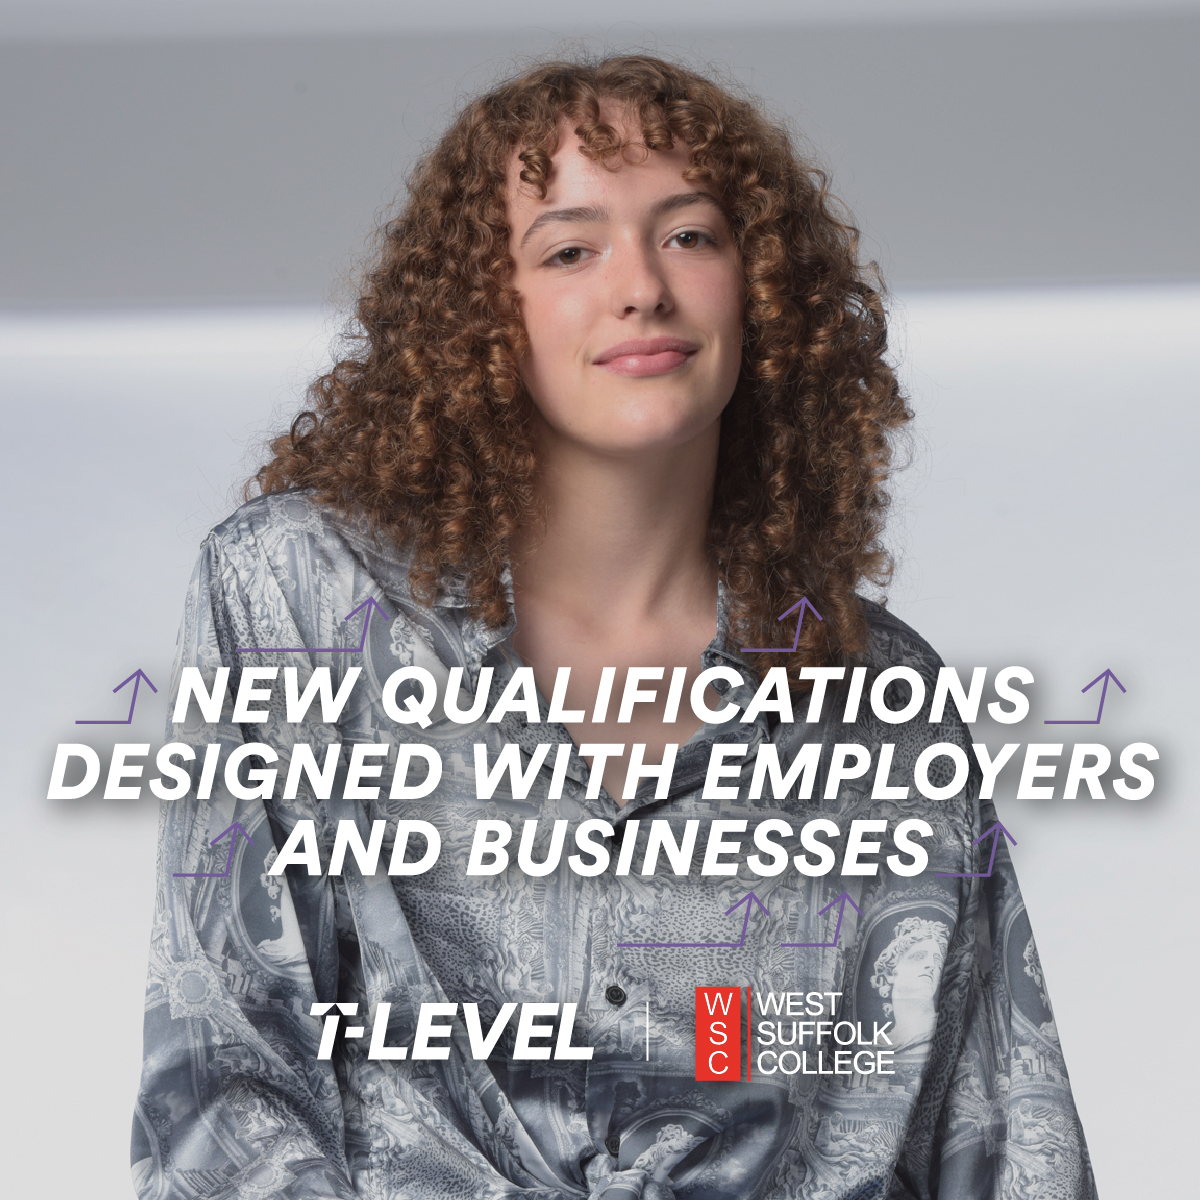 Work Placement and T-Levels Employer Handbook